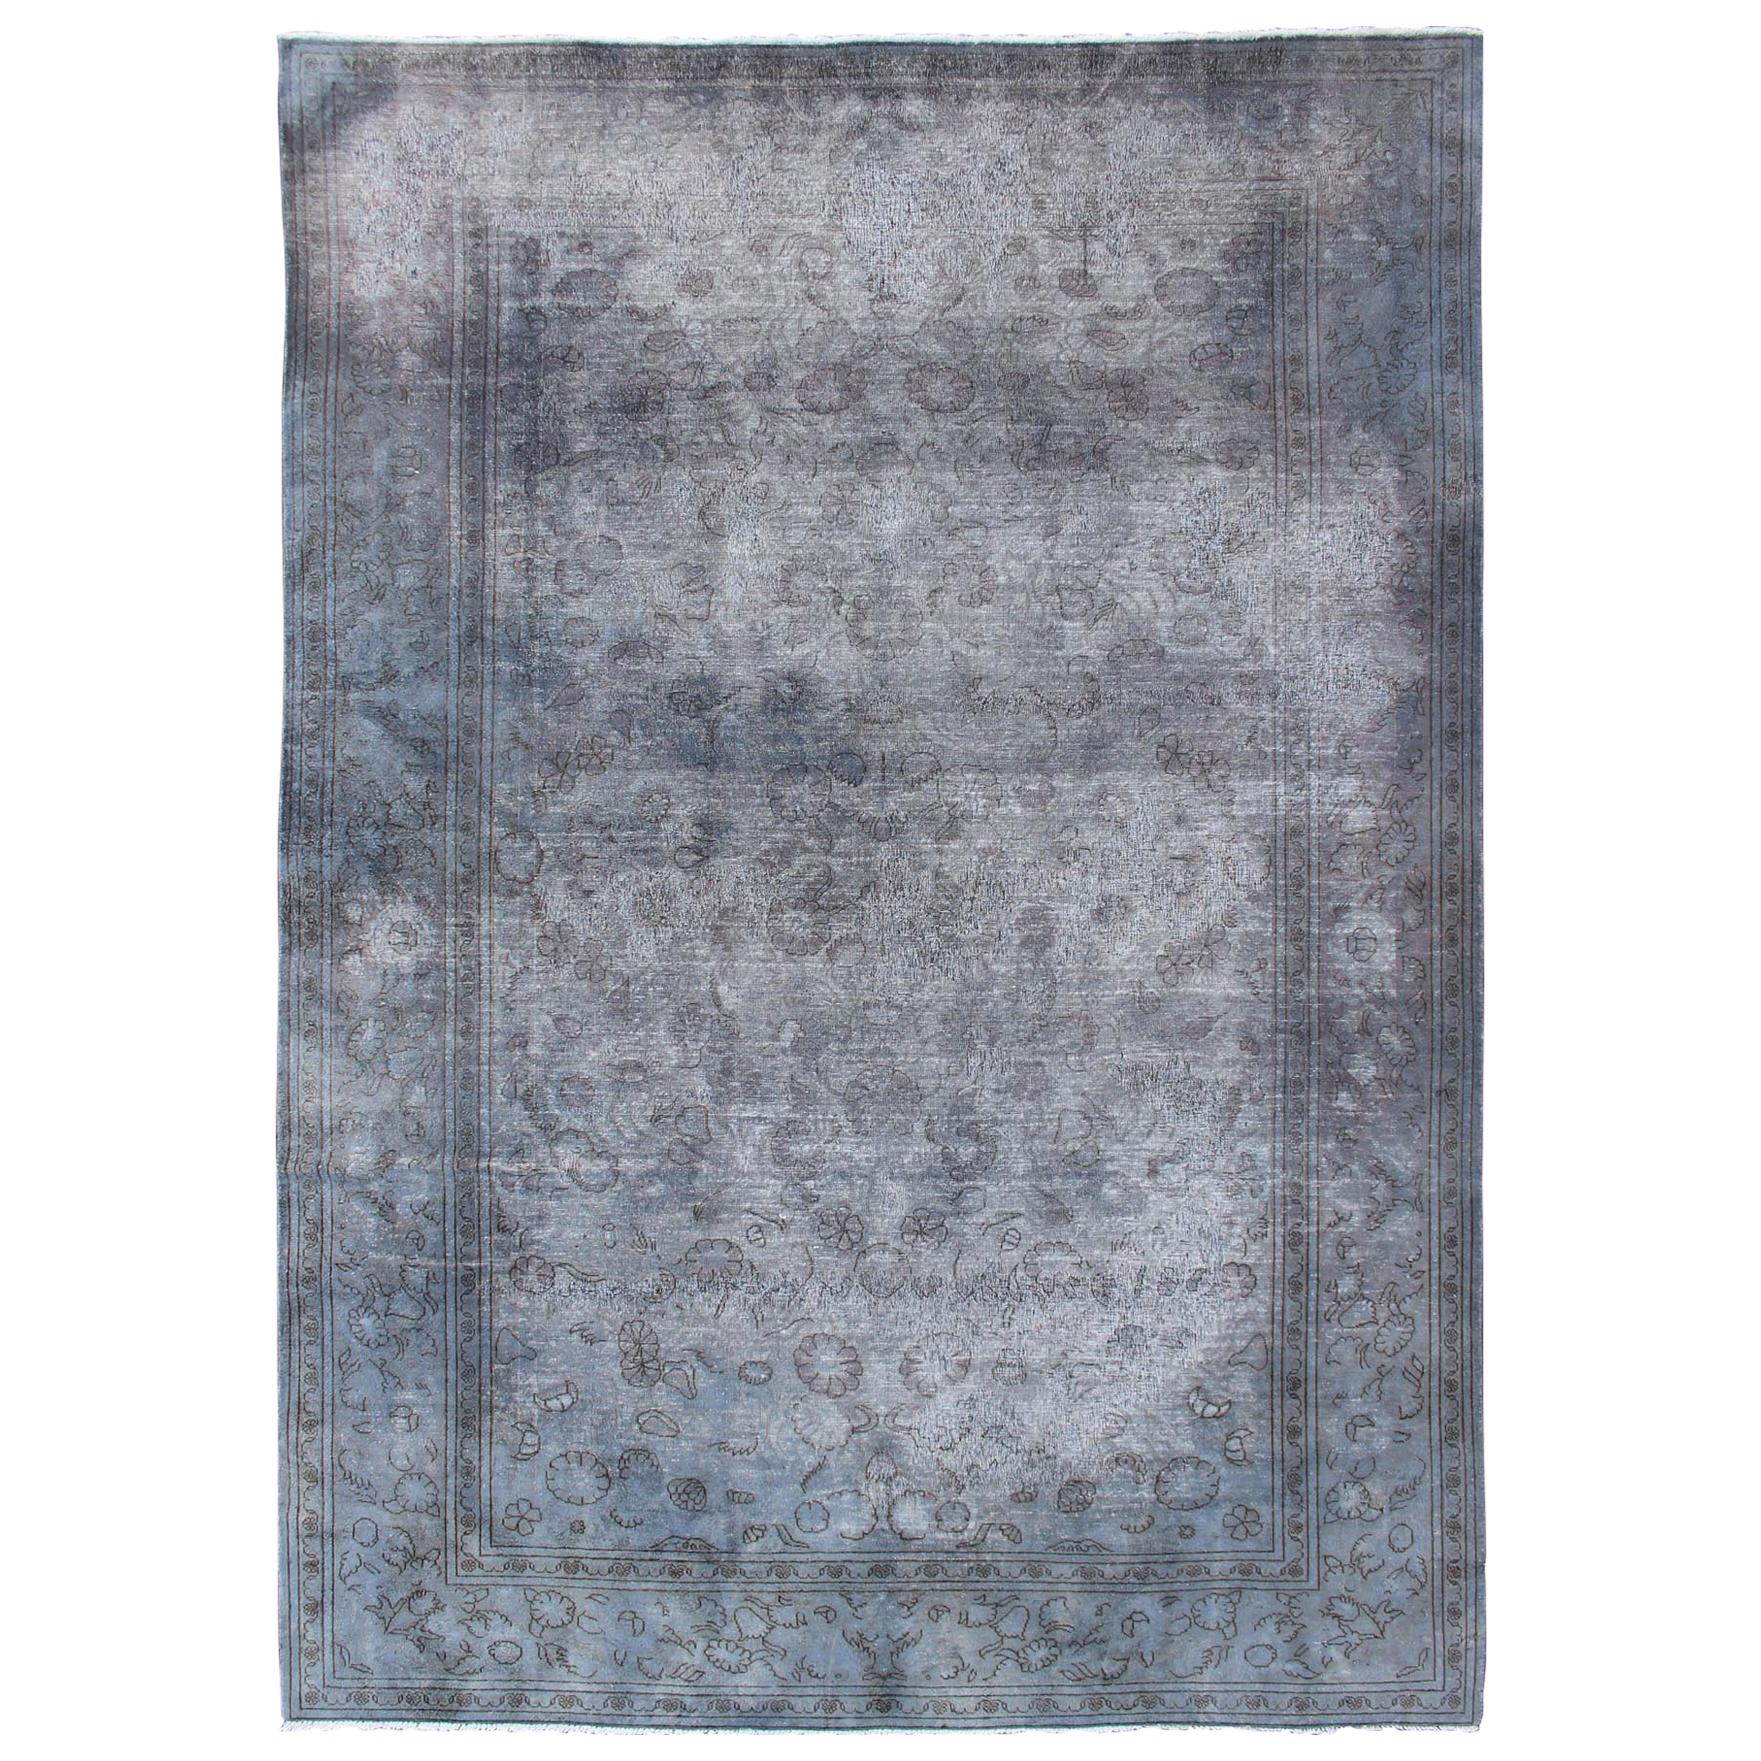 Vintage Indian Amritsar Rug in Gray Tones and Brown Highlights by Keivan Woven A